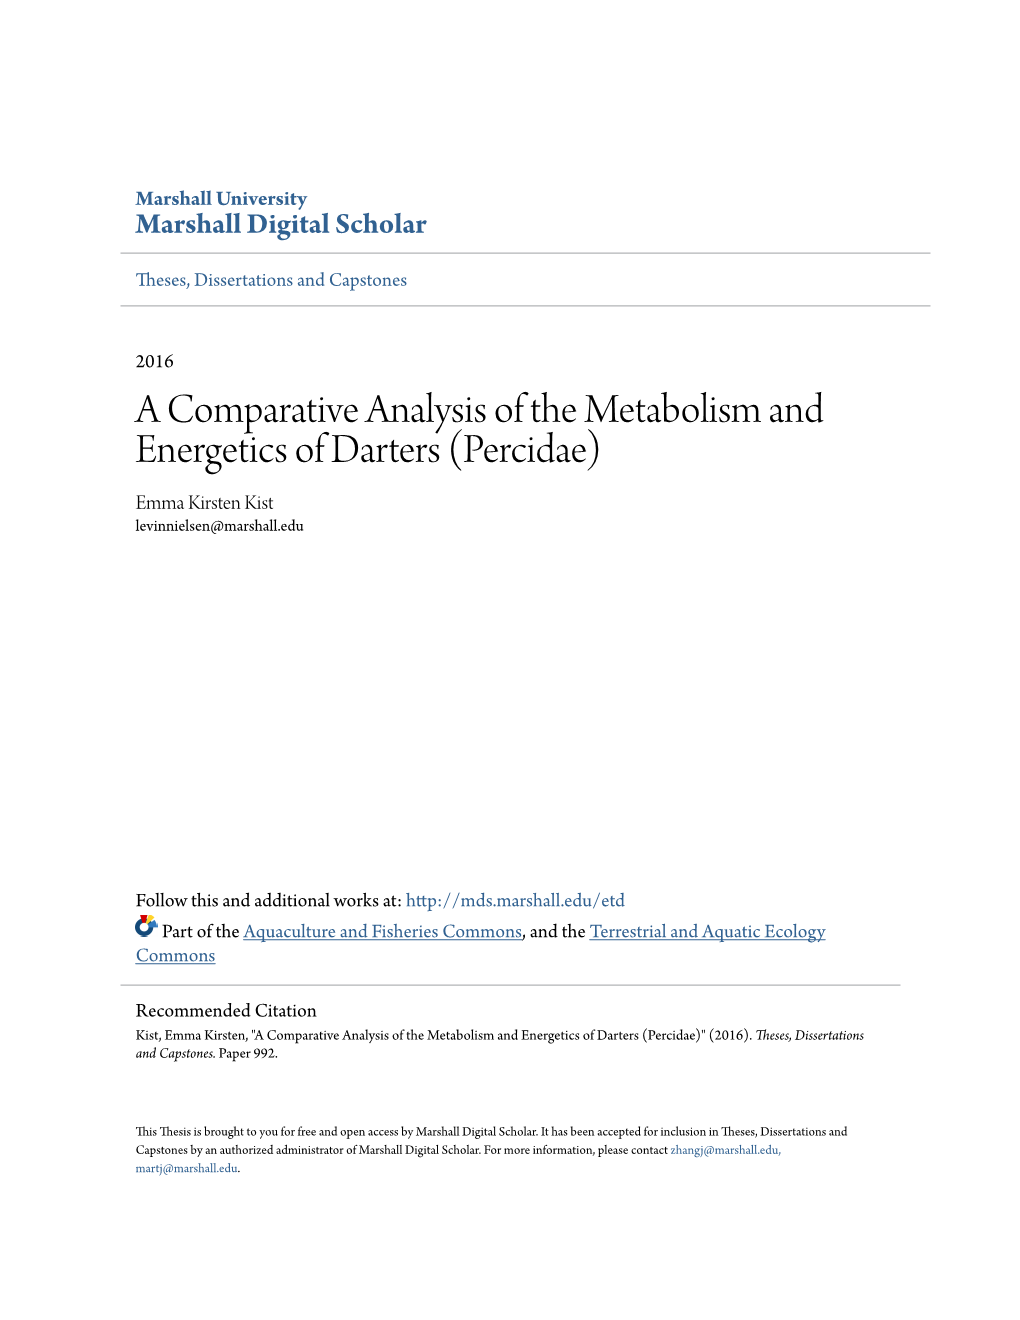 A Comparative Analysis of the Metabolism and Energetics of Darters (Percidae) Emma Kirsten Kist Levinnielsen@Marshall.Edu